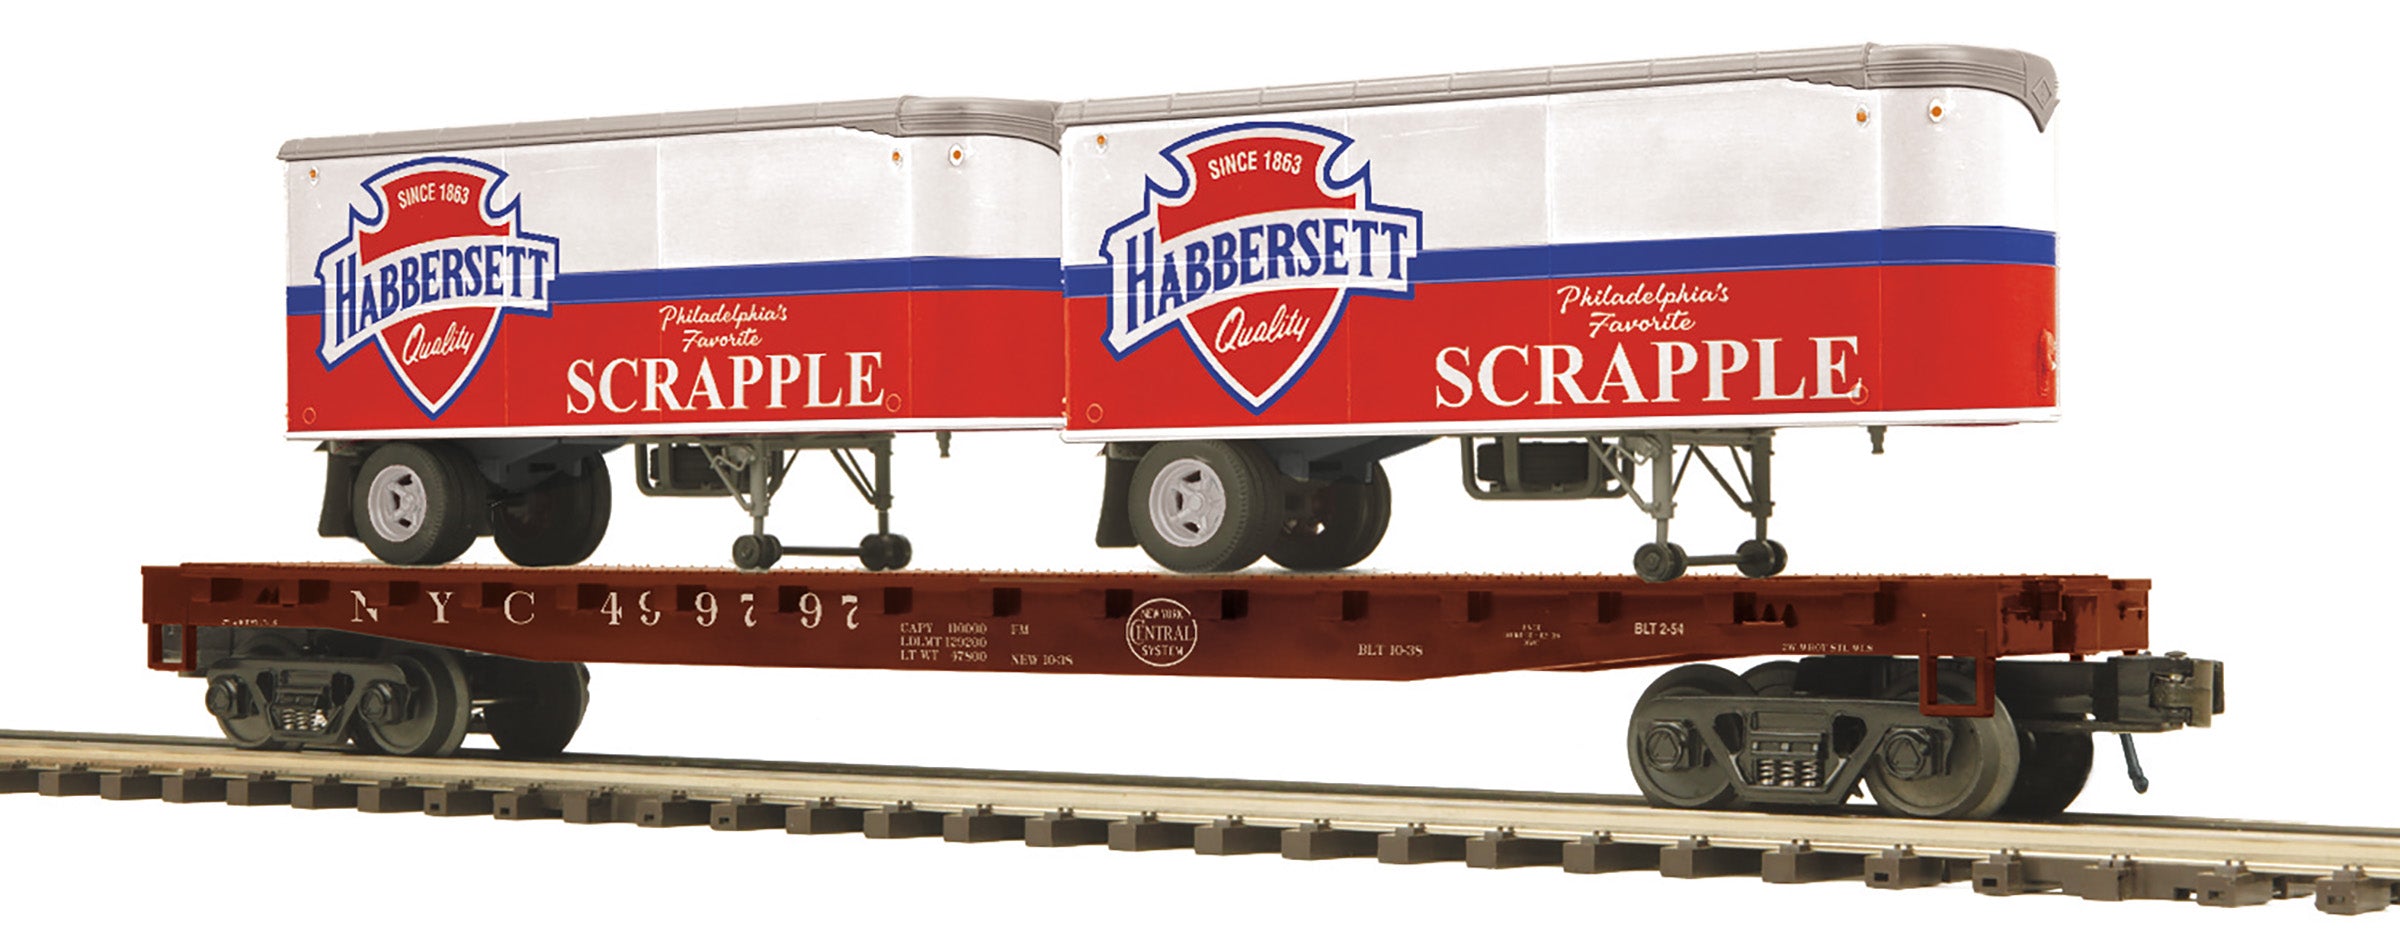 MTH 20-95556 - Flat Car "New York Central" w/ (2) PUP Trailers (Scrapple)